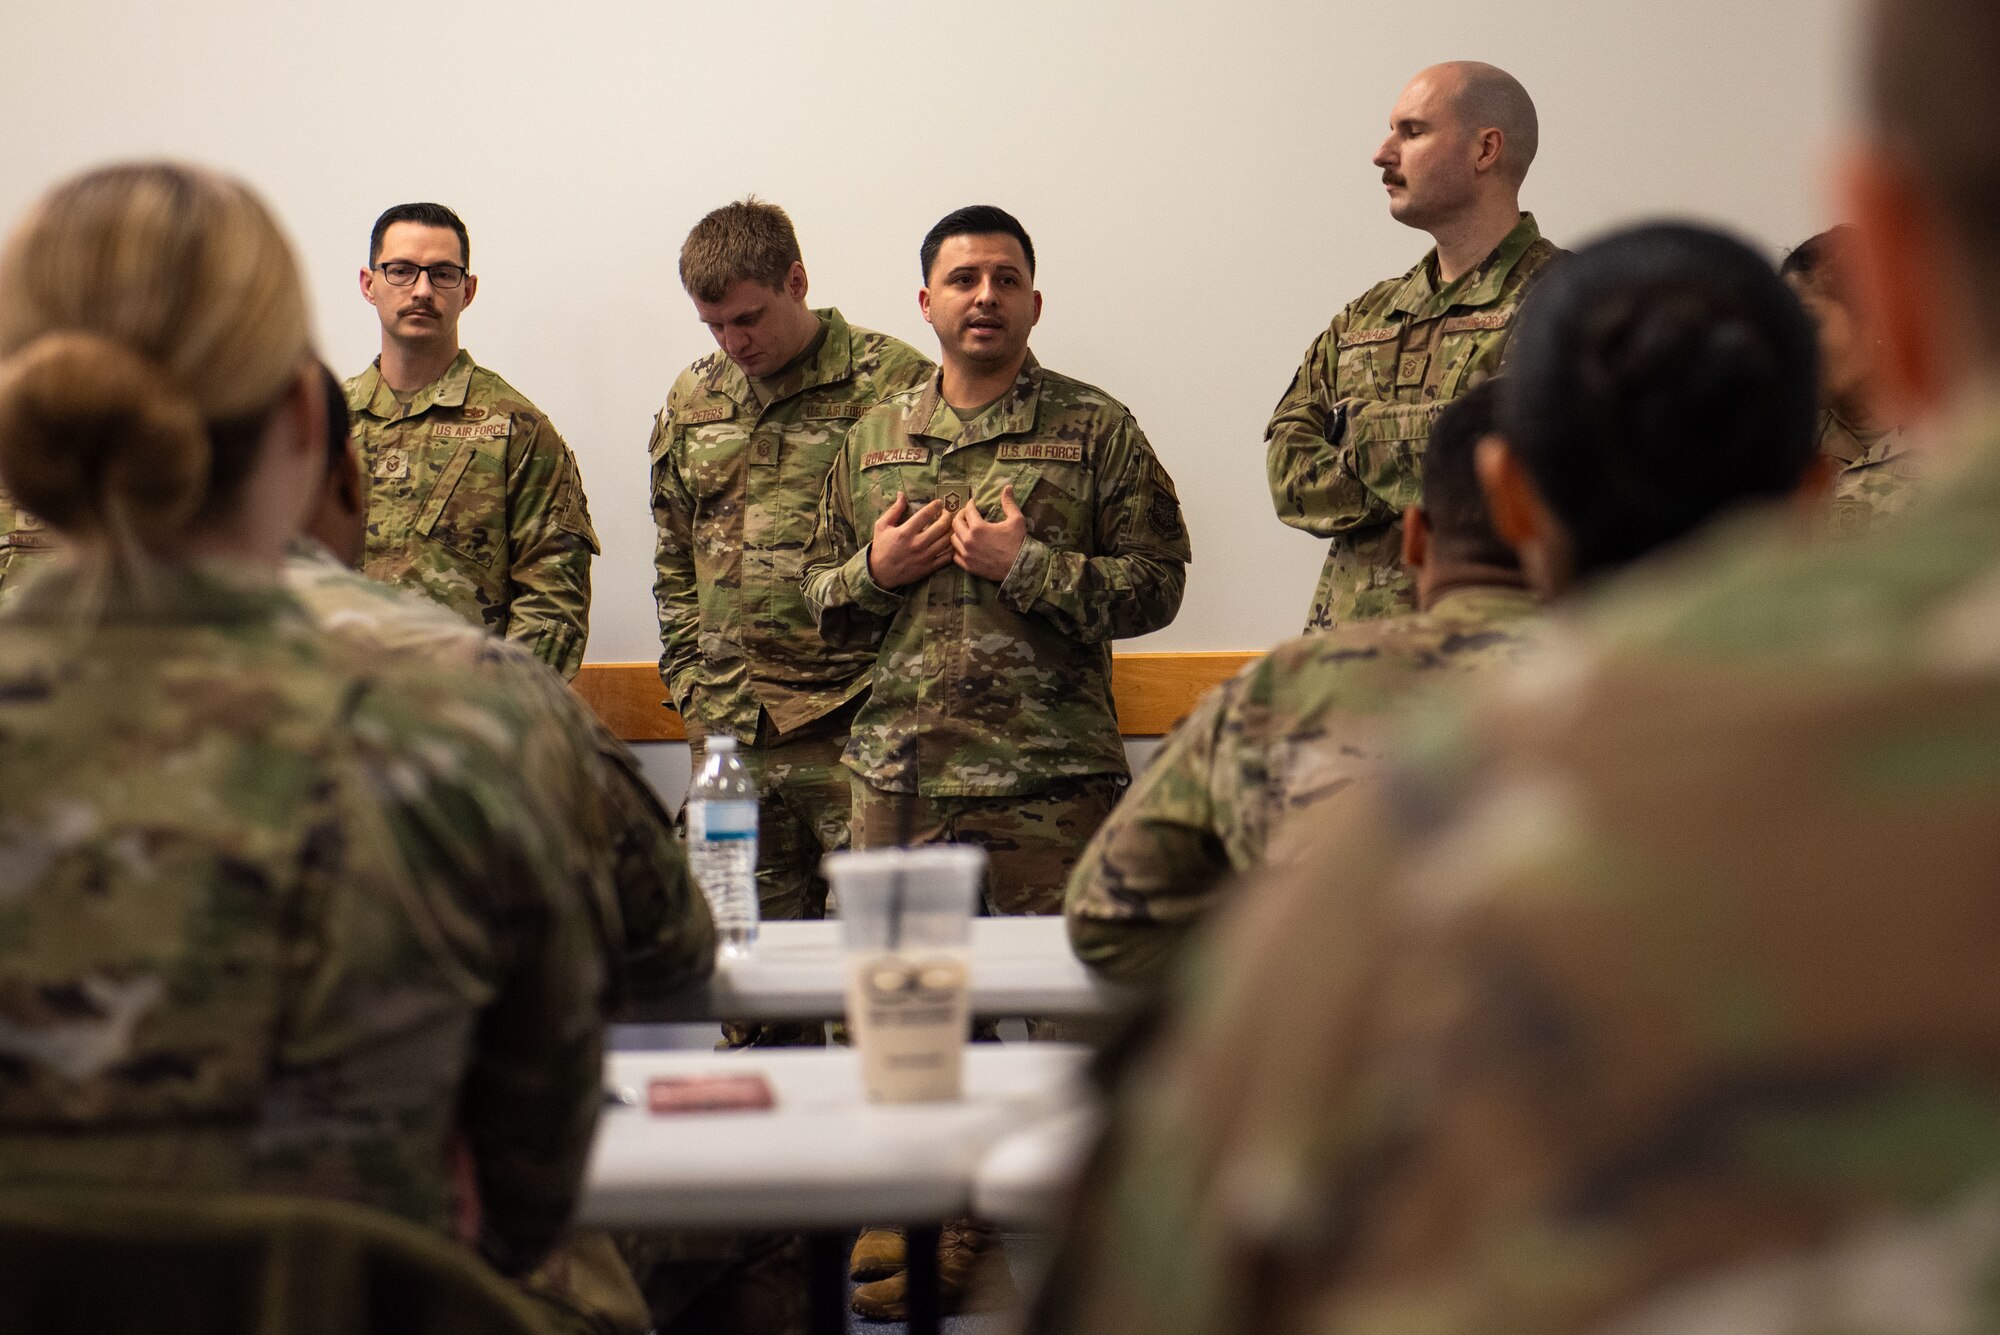 The “Airmen Prevail” symposium is a course designed for Airmen to learn skills to identify and effectively respond to peers undergoing mental health crises, ensuring quality-of-life enhancements to best support and strengthen Airmen and family resilience.